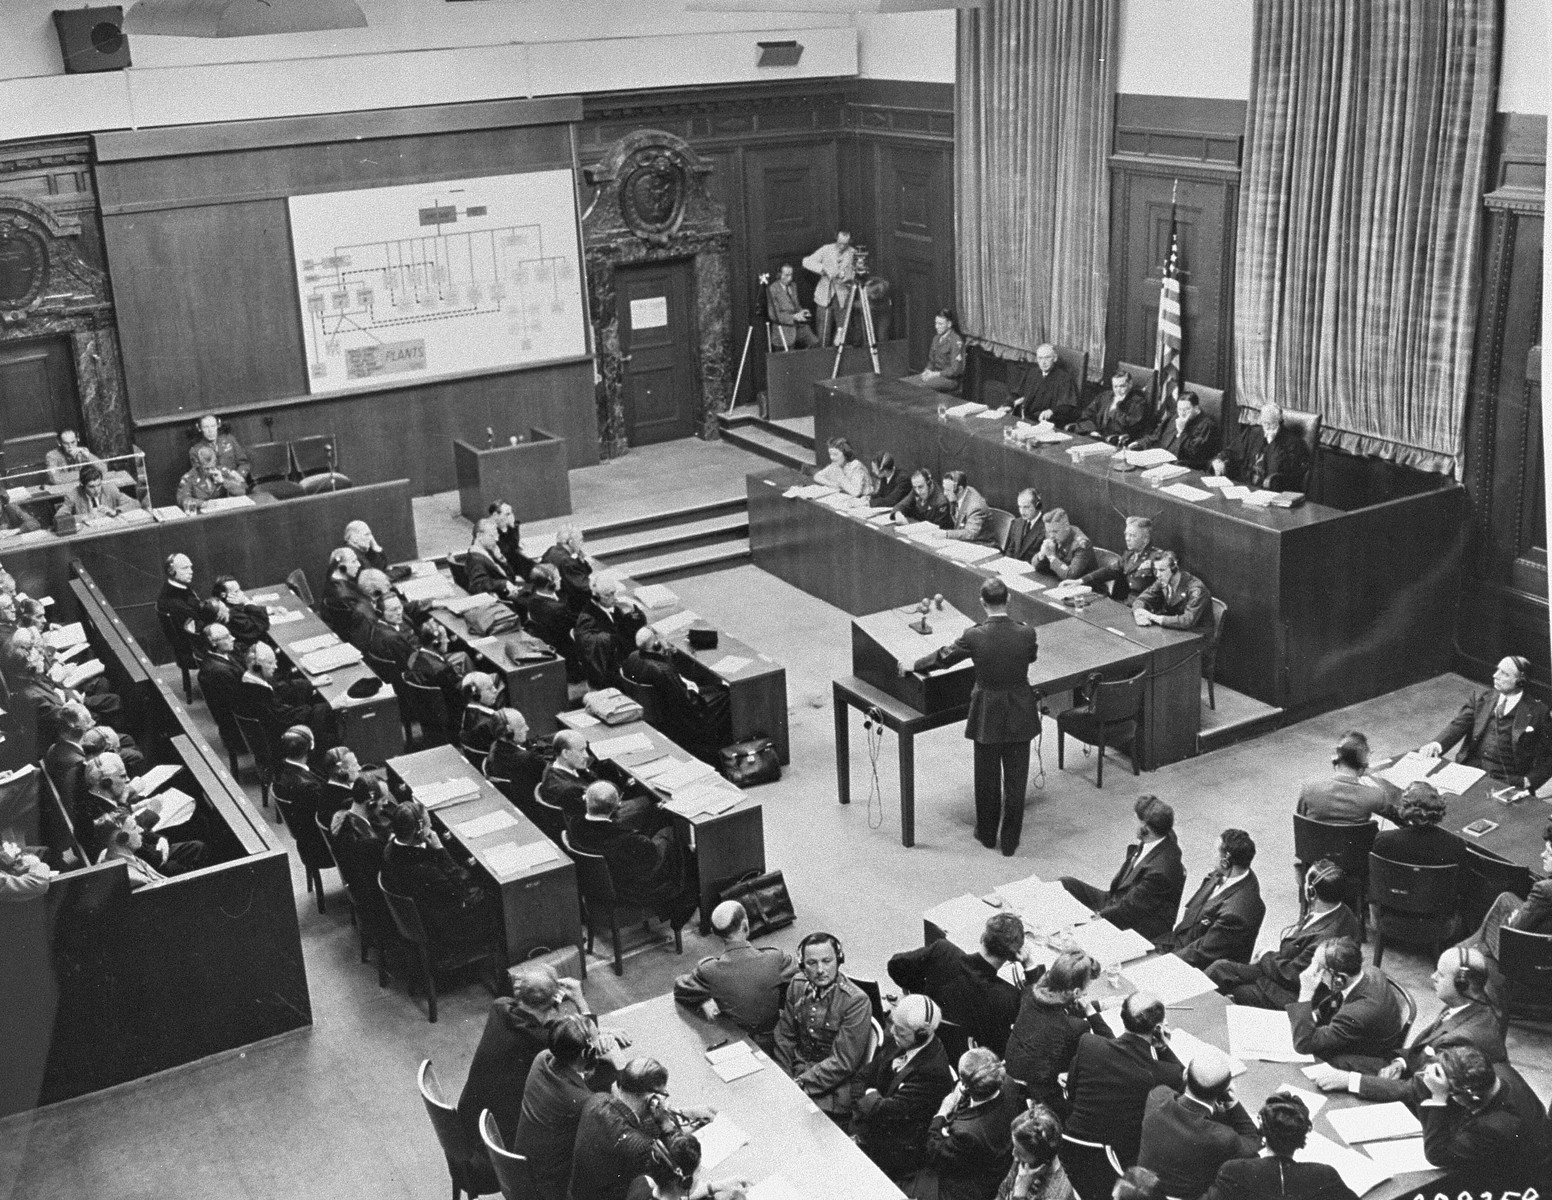 US Chief of Counsel Brigadier General Telford Taylor (standing in center) opens the prosecution's case in front of the Military Tribunal VI (upper right) at the I.G. Farben Trial.